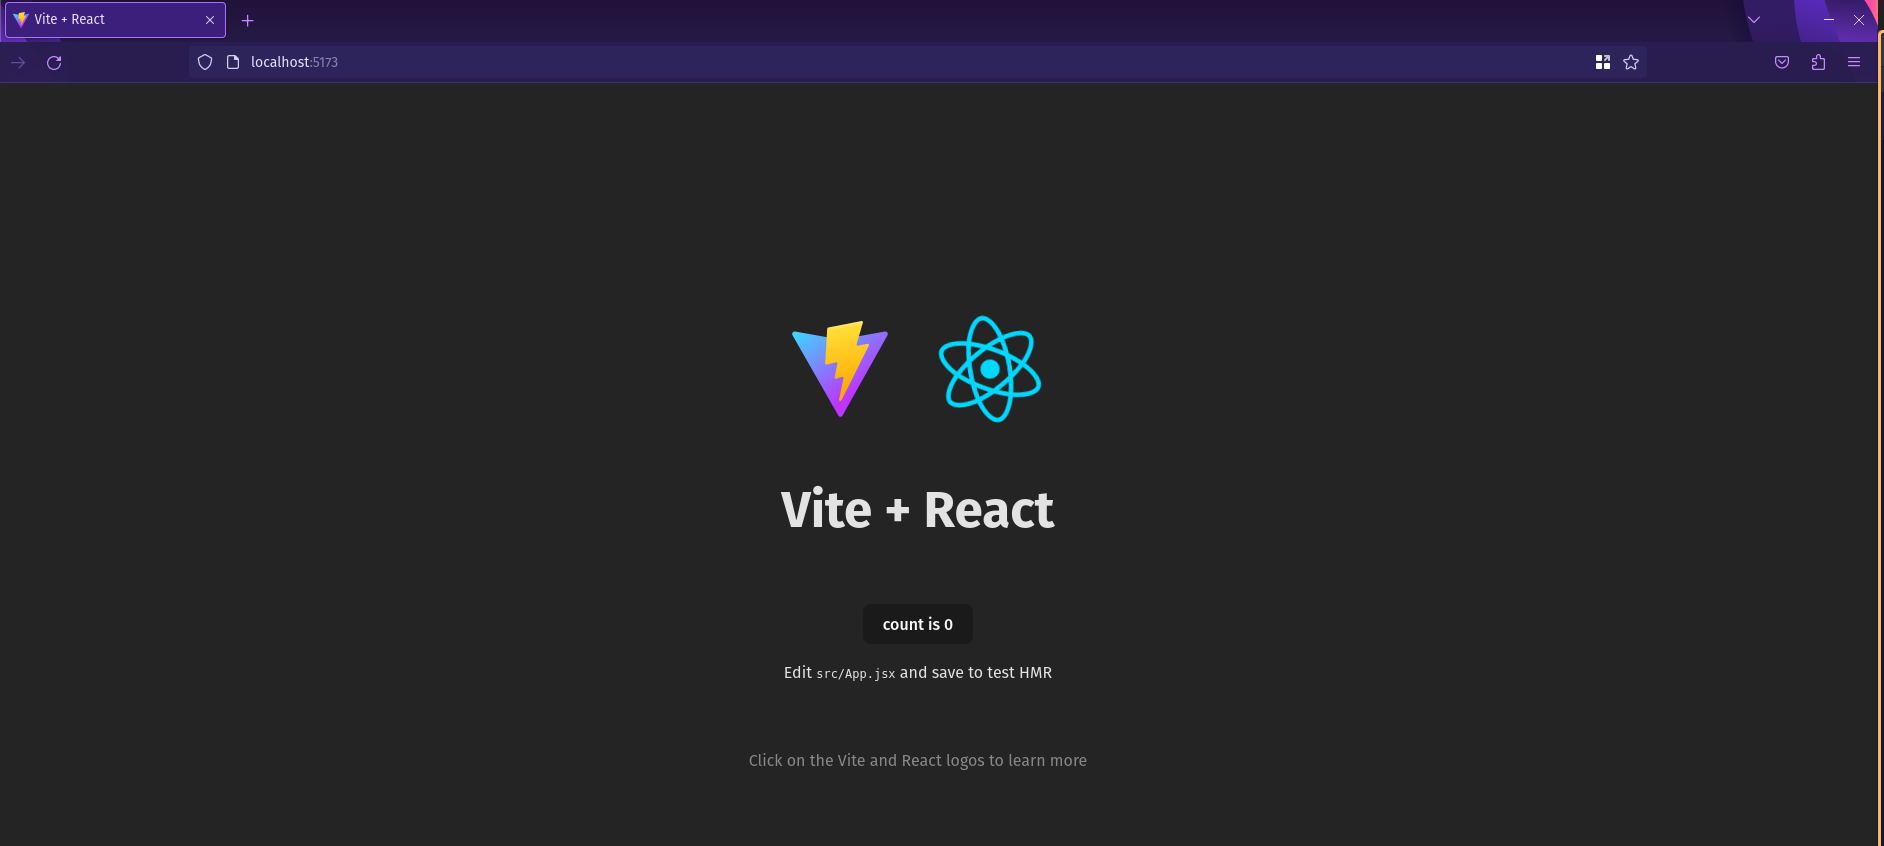 Image of running react application scaffolded with Vite